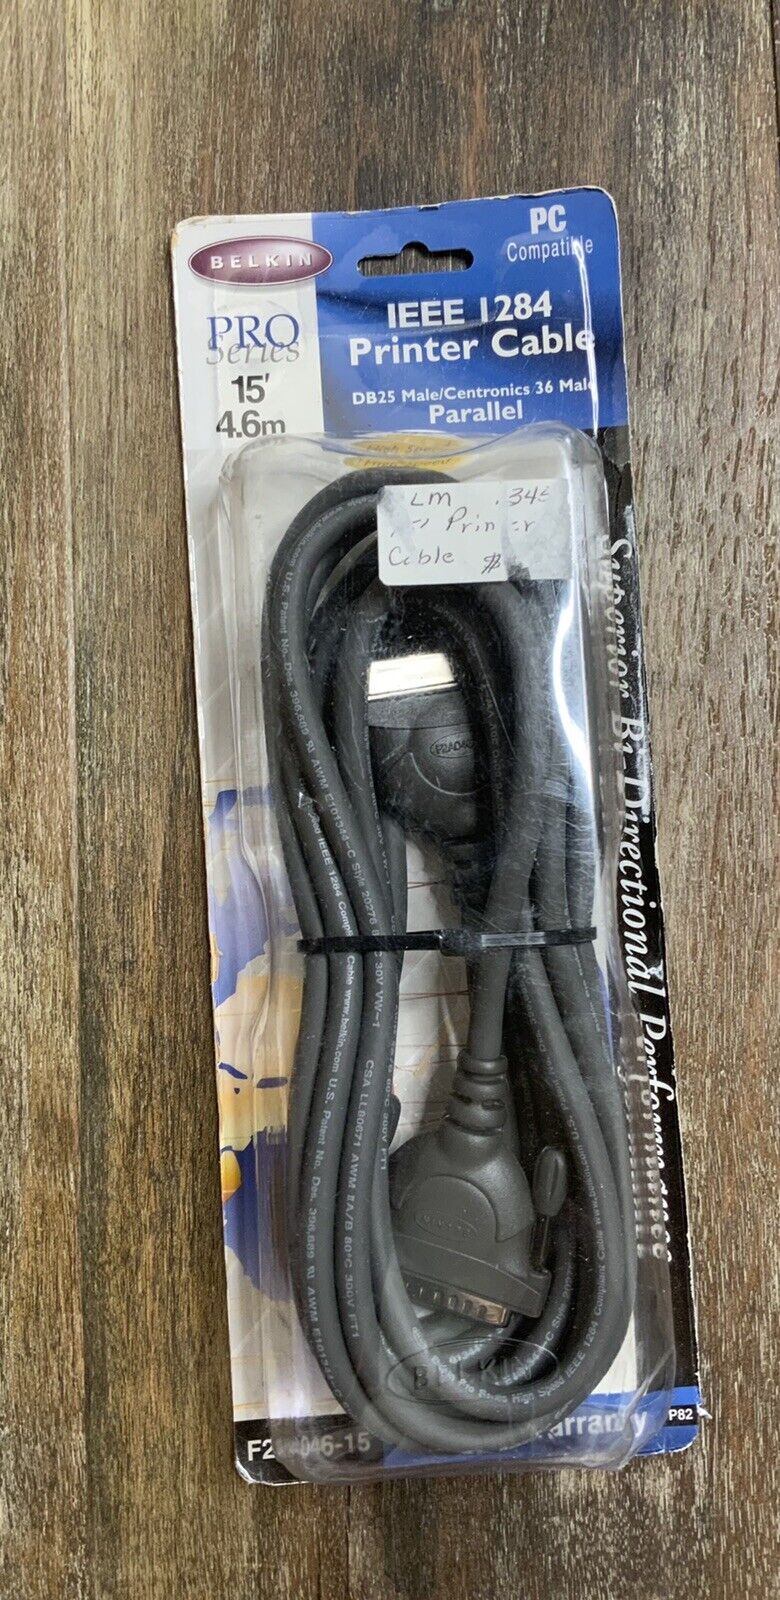 Belkin 1284 Printer Cable DB25 Male Parallel 15’ pro Series New in Package